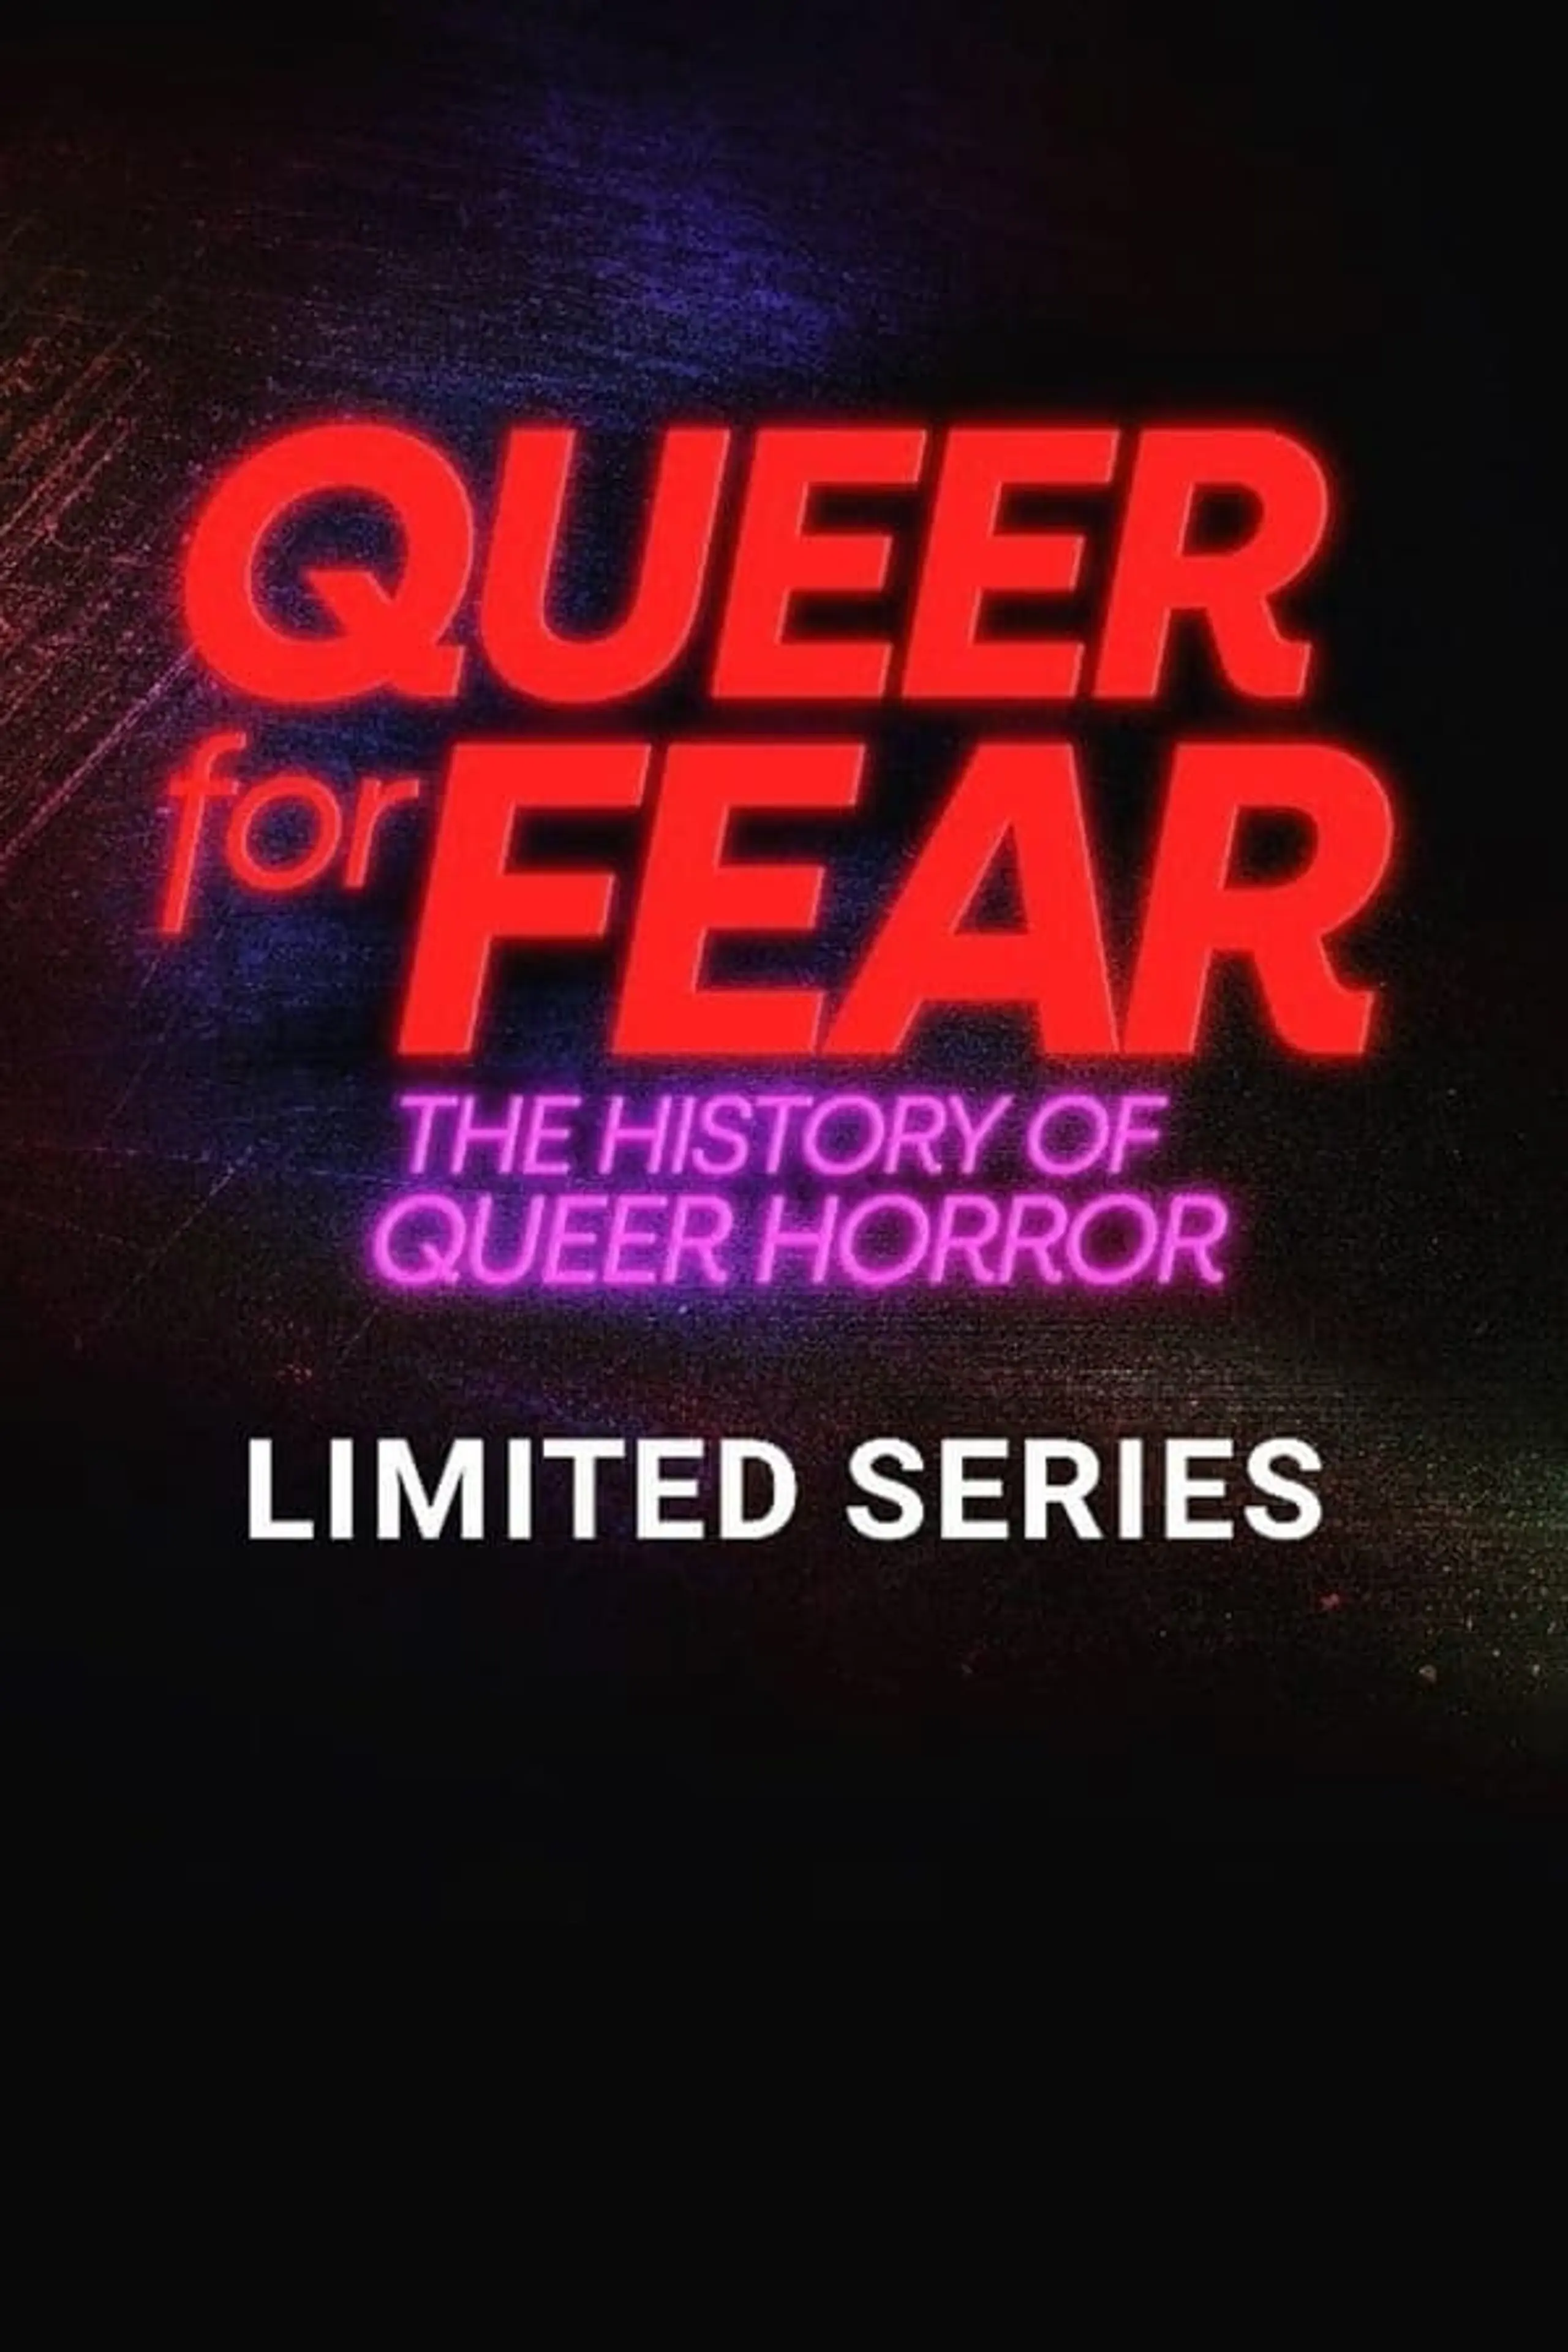 Queer for Fear: A History of Queer Horror